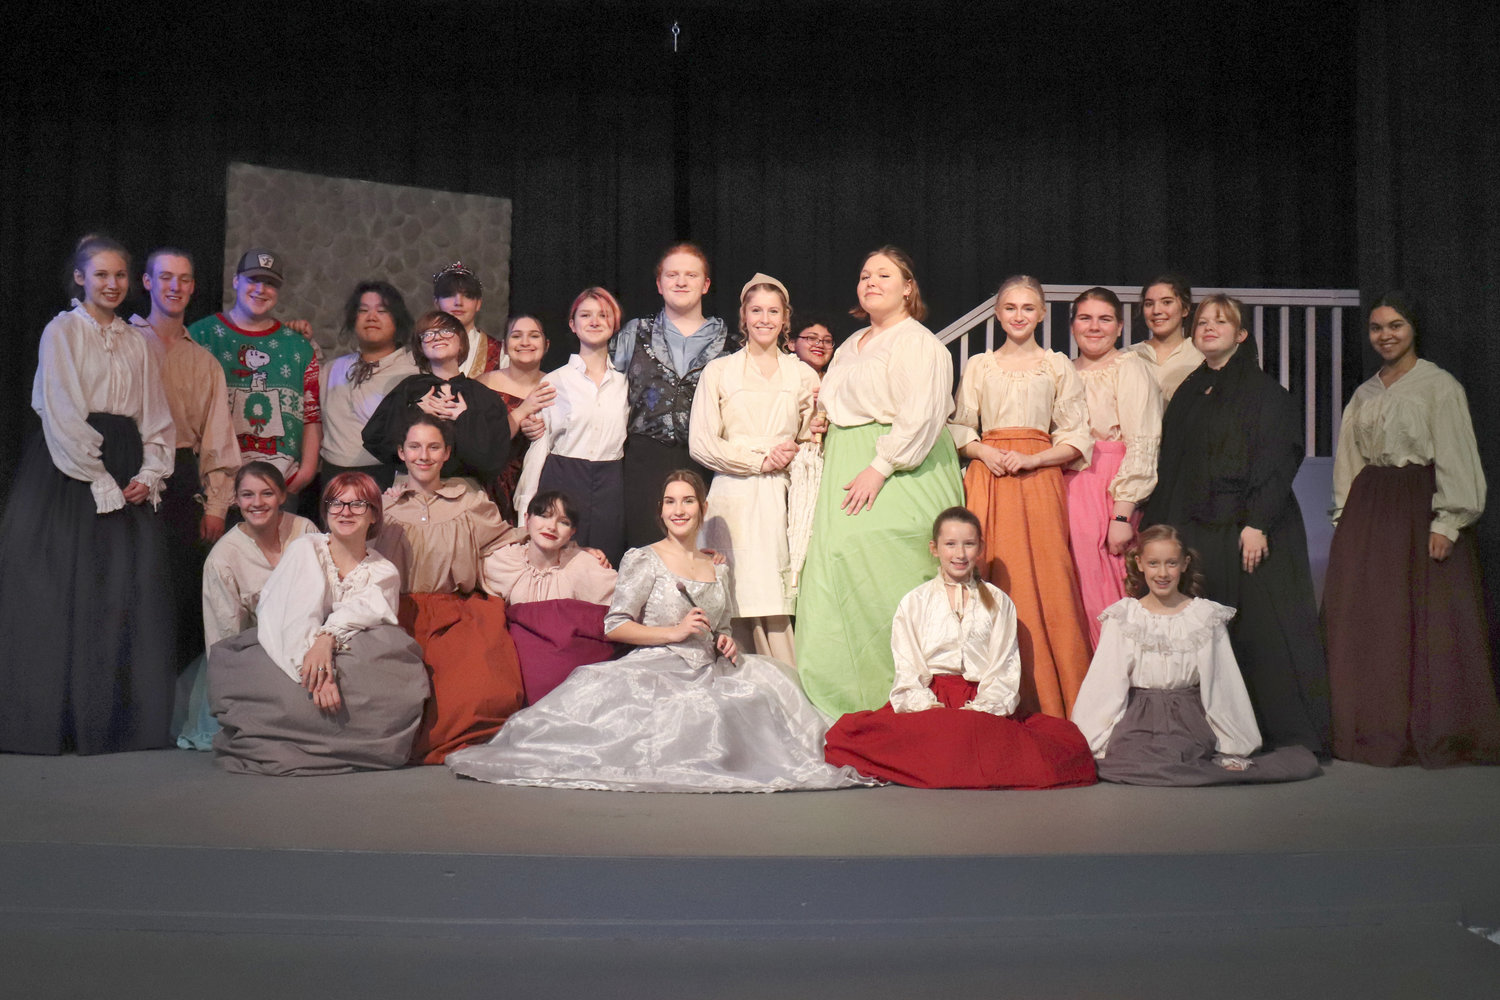 The cast of W.F. West High School’s production of Cinderella poses for a photo on stage at the school’s theater in Chehalis on Tuesday. A full story on W.F. West High School’s winter musical will be published in the Saturday, Dec. 10, edition of The Chronicle. 